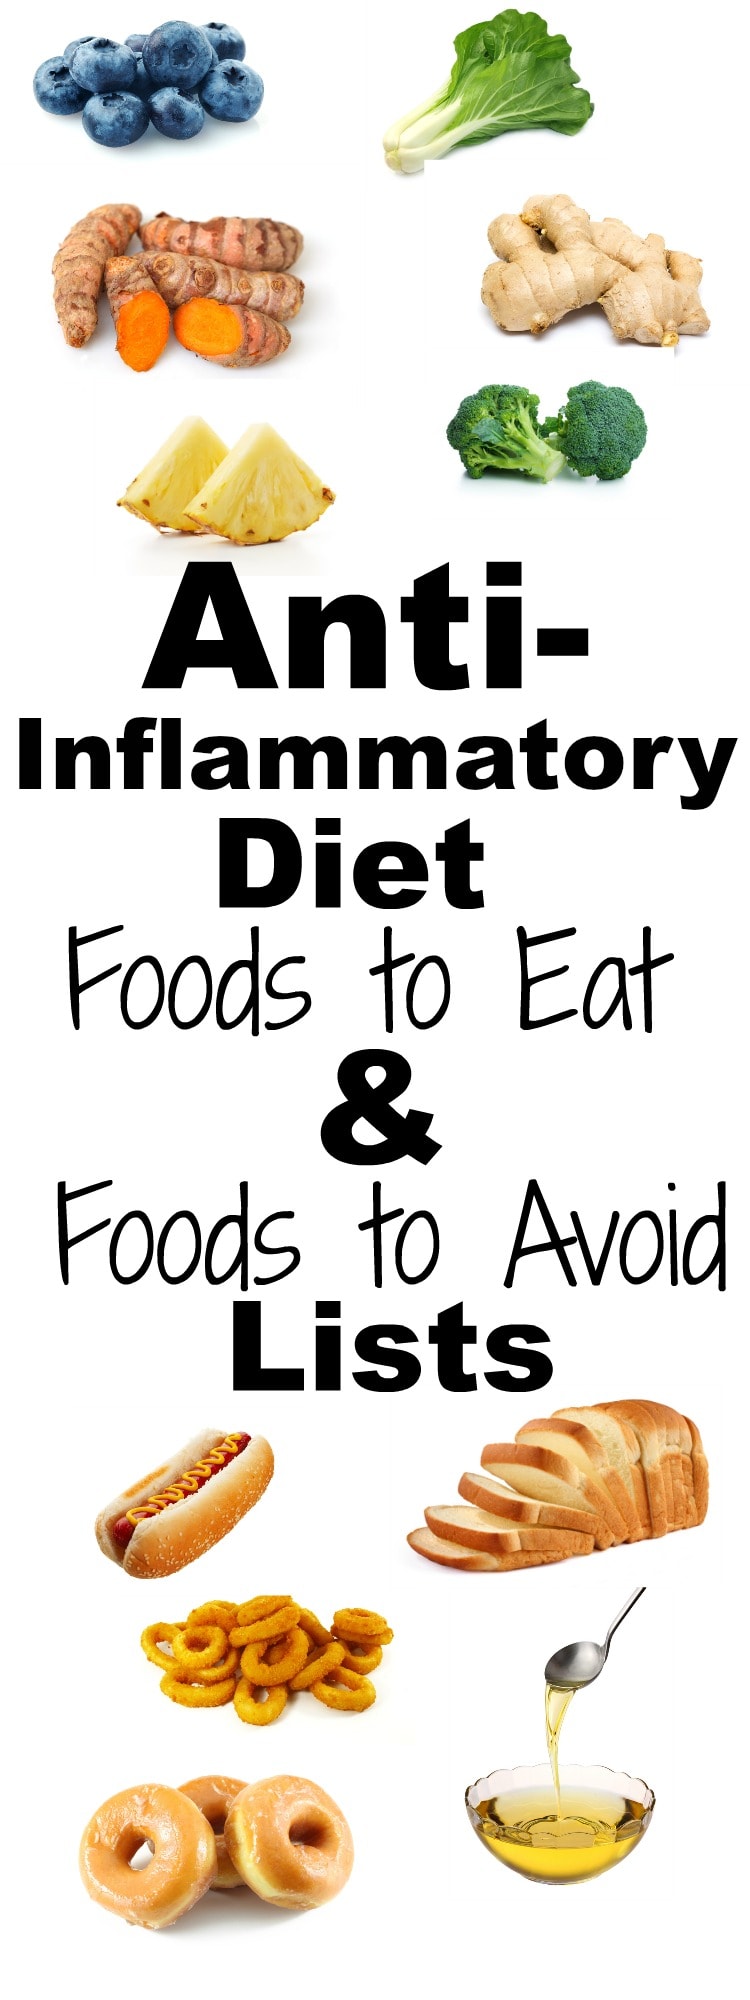 Anti-inflammatory diet foods to eat and foods to avoid LISTS.